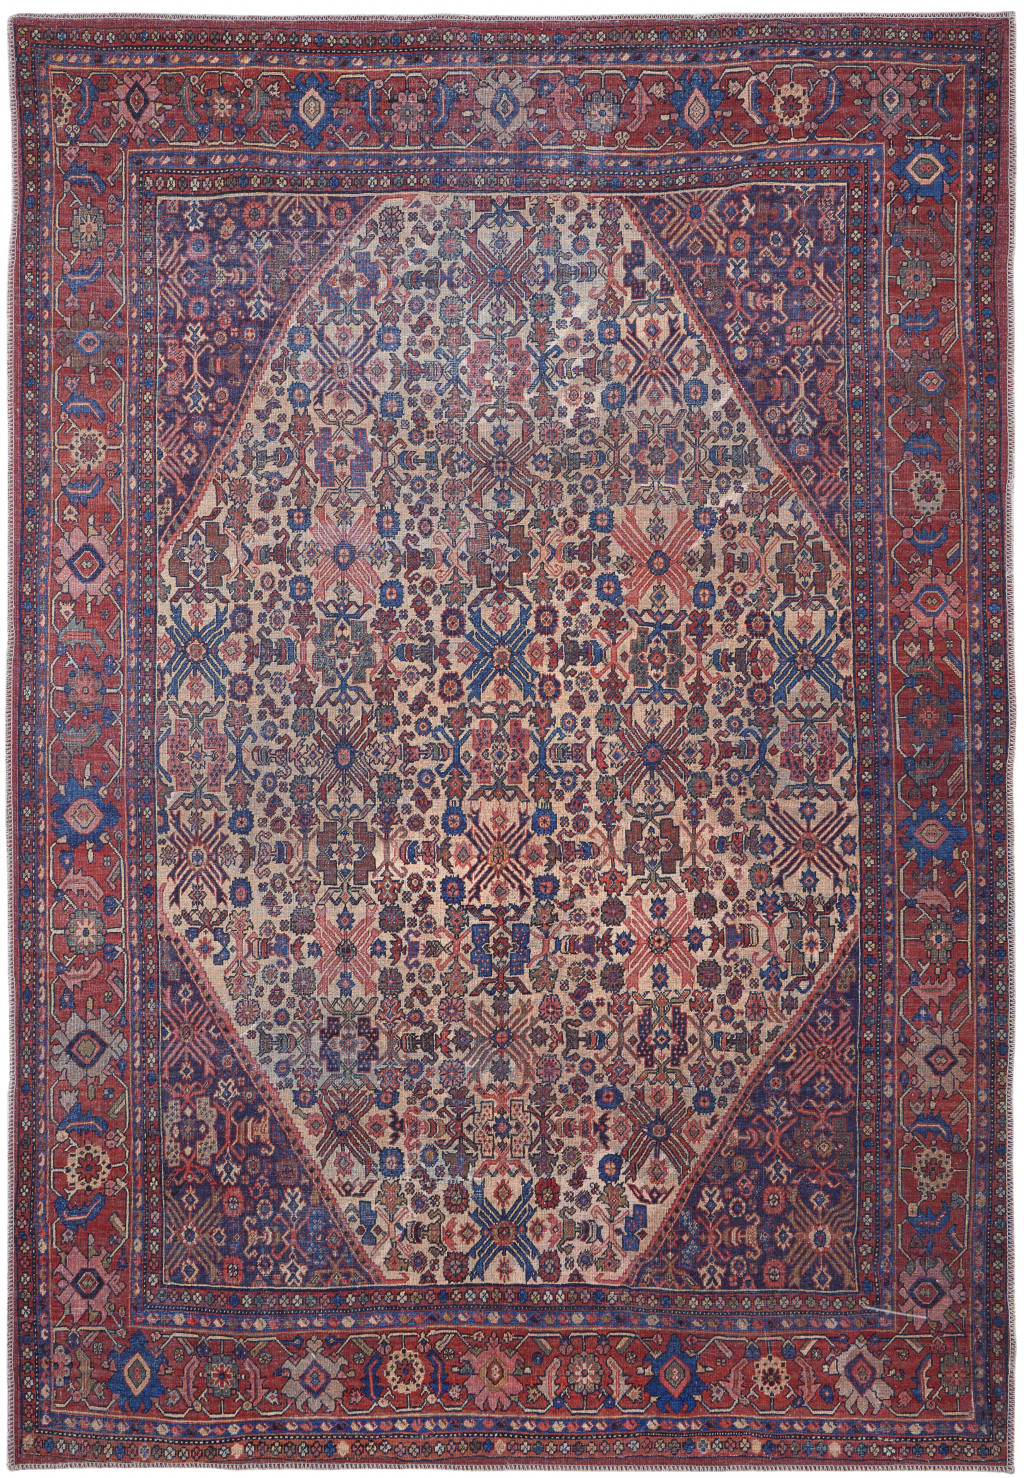 9' X 12' Red Tan And Blue Floral Power Loom Area Rug-515129-1